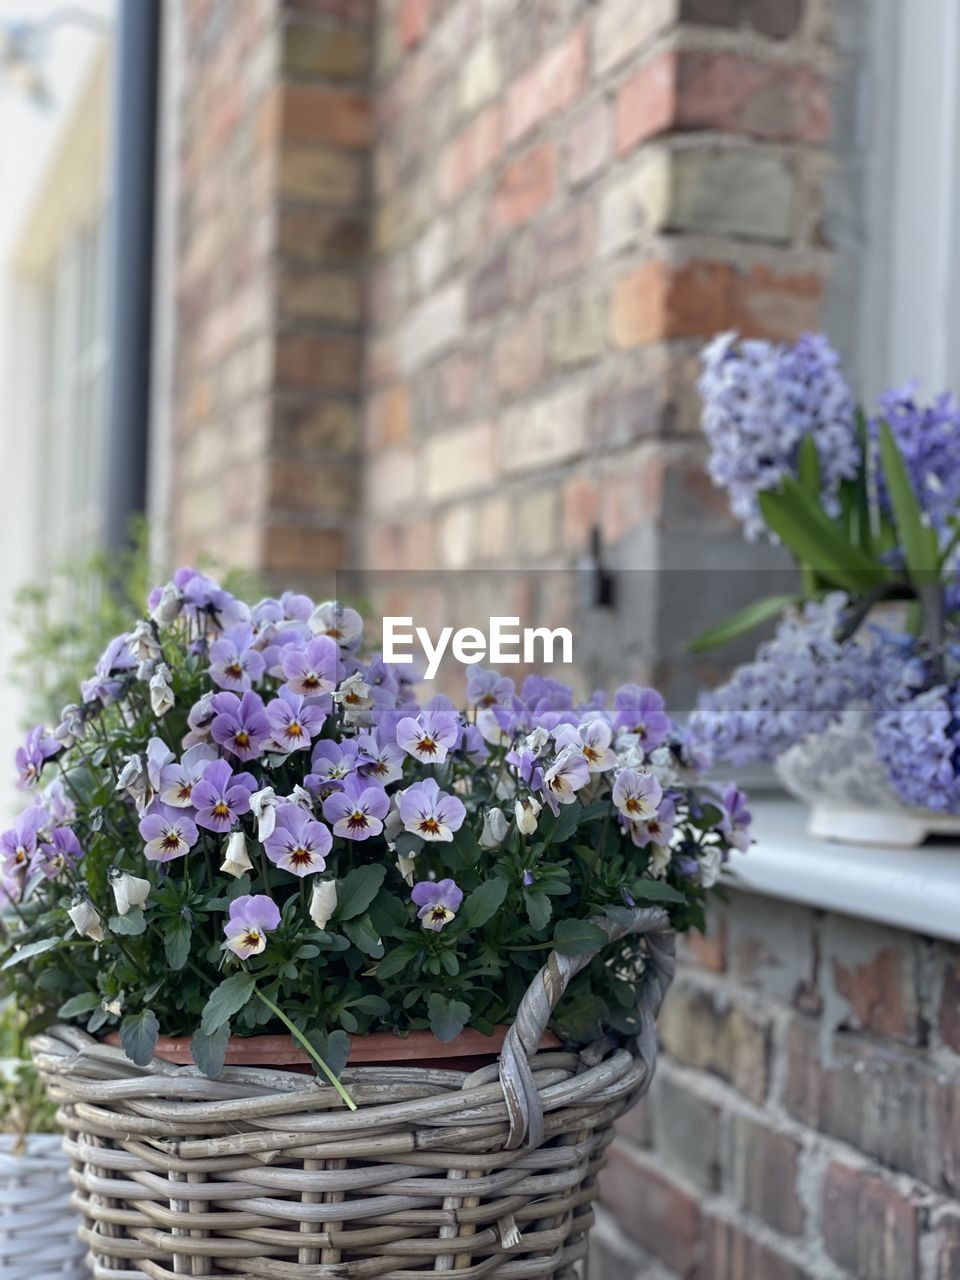 flowering plant, flower, plant, basket, freshness, nature, container, architecture, day, beauty in nature, no people, building exterior, fragility, bouquet, purple, focus on foreground, wicker, outdoors, lavender, built structure, growth, window, wall, lilac, brick wall, brick, spring, close-up, flowerpot, flower head, building, potted plant, flower arrangement, picnic basket